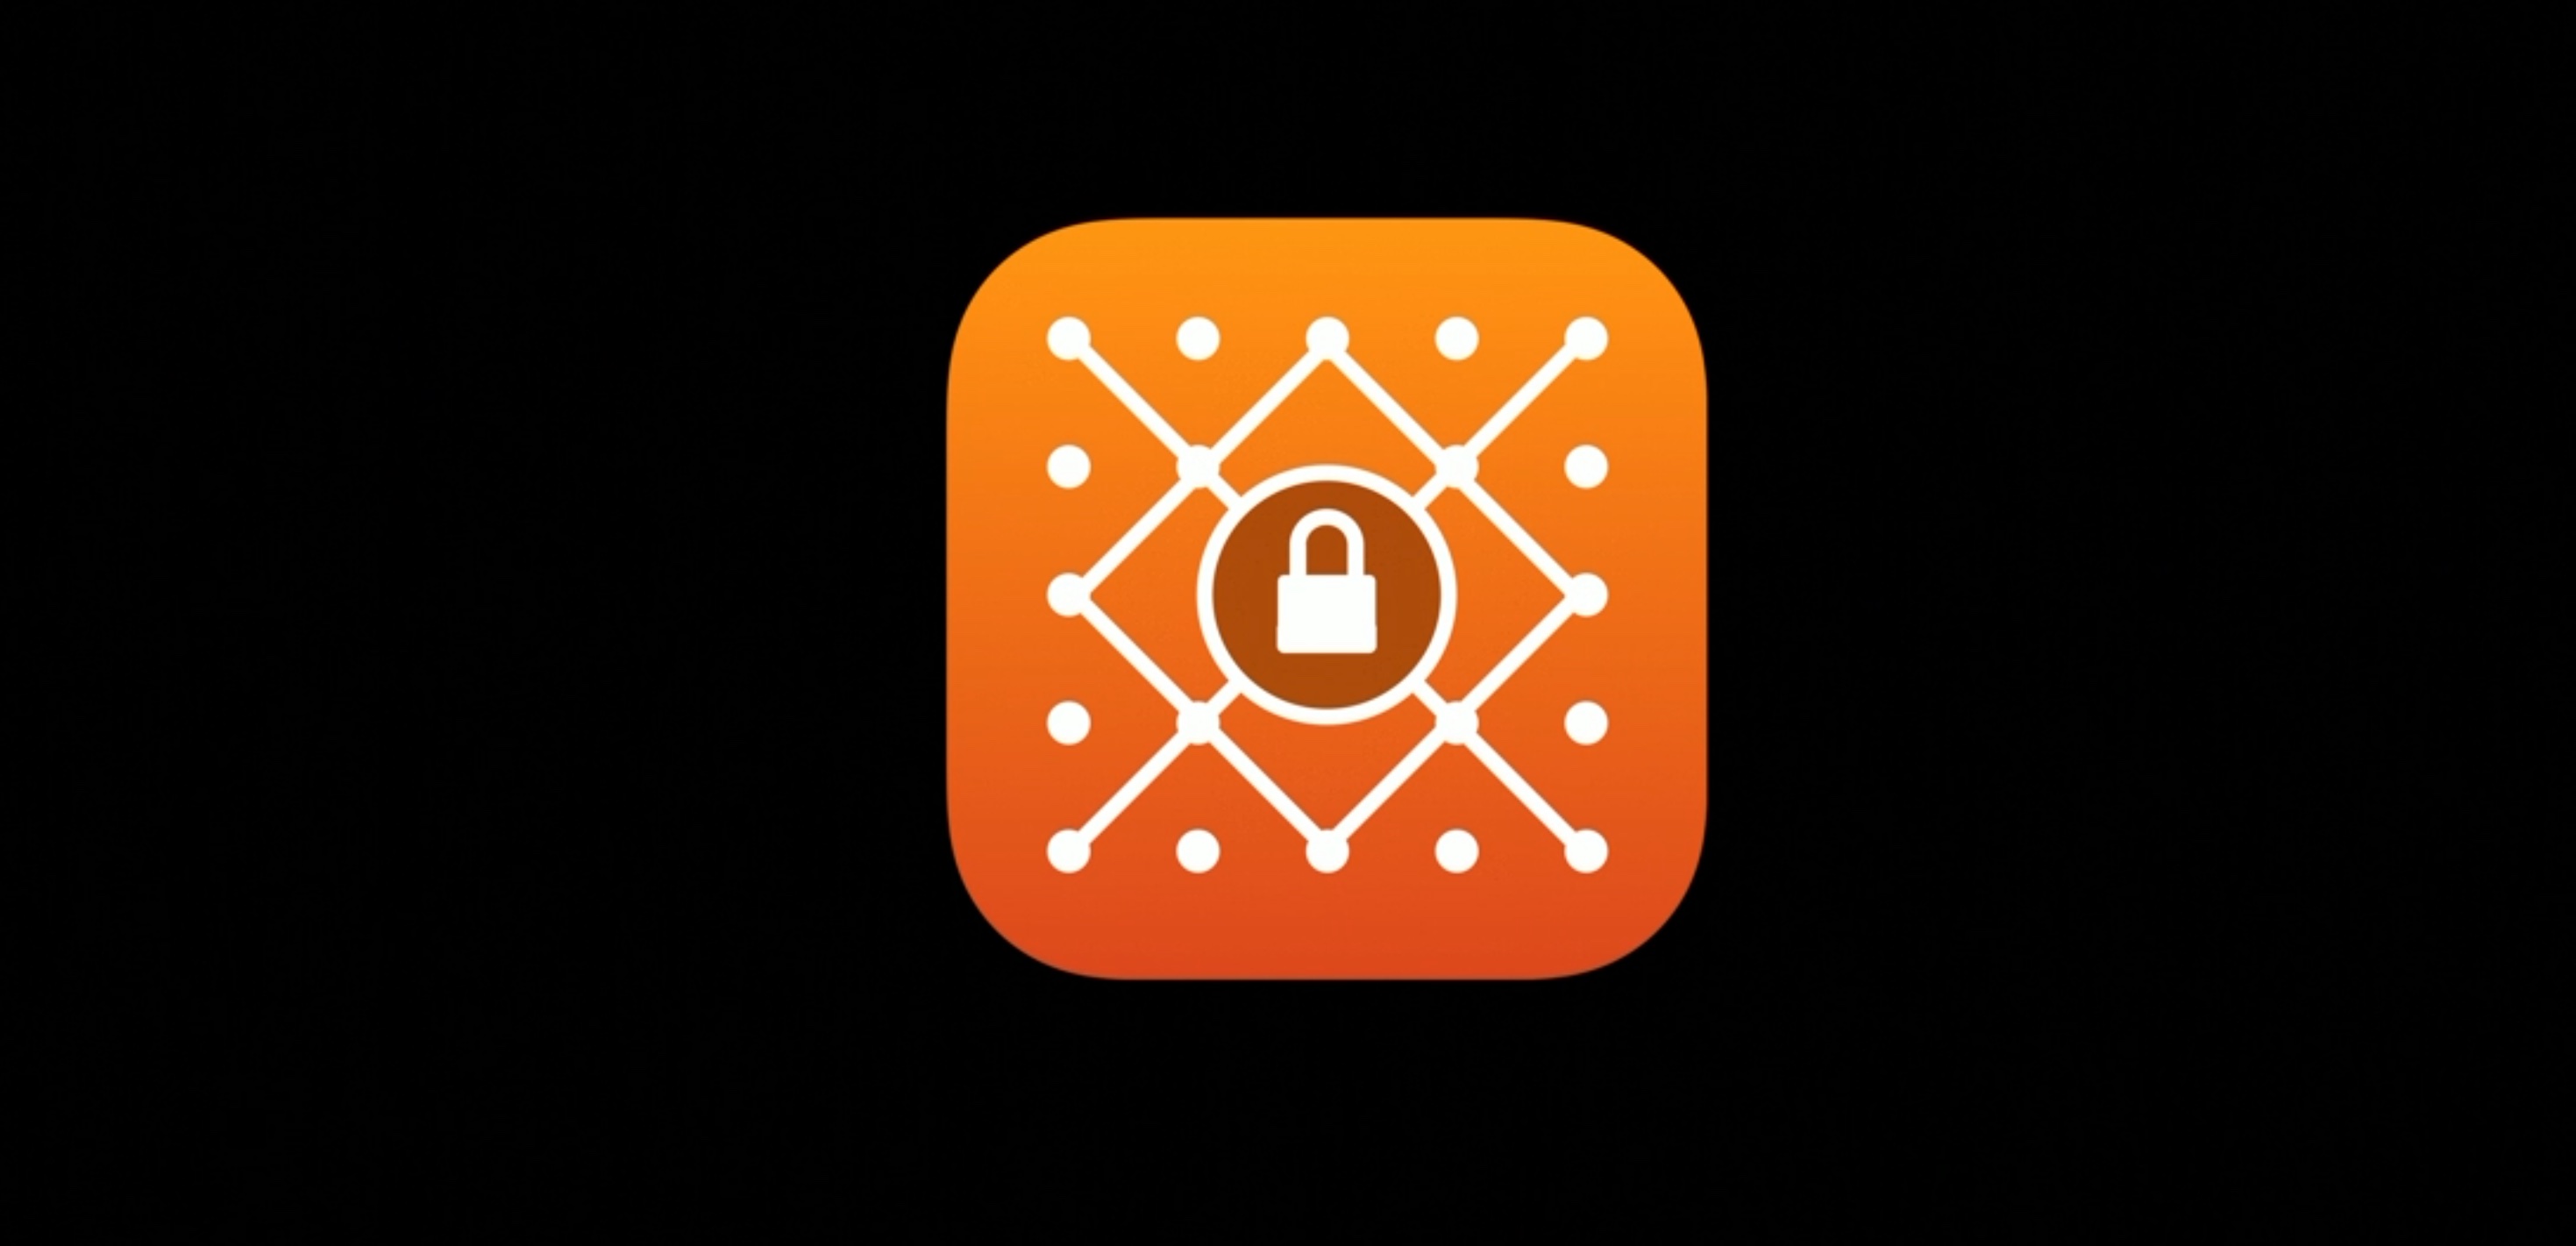 Foundation of Apple Security and Privacy Features